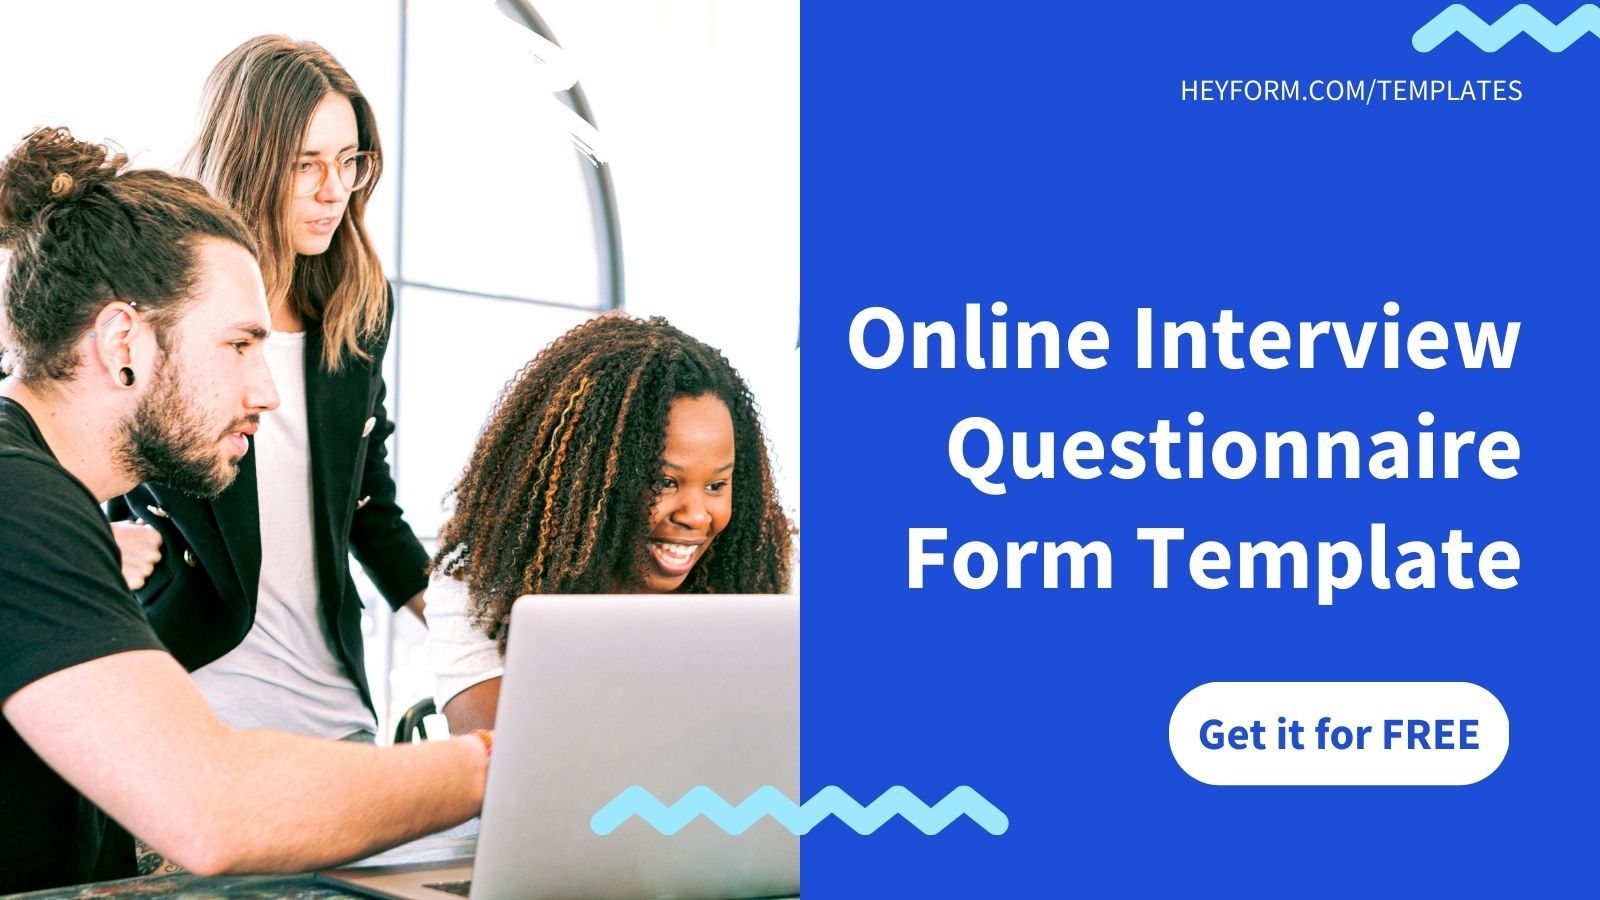 Get Free Online Interview Questionnaire Form Template for Recruiters